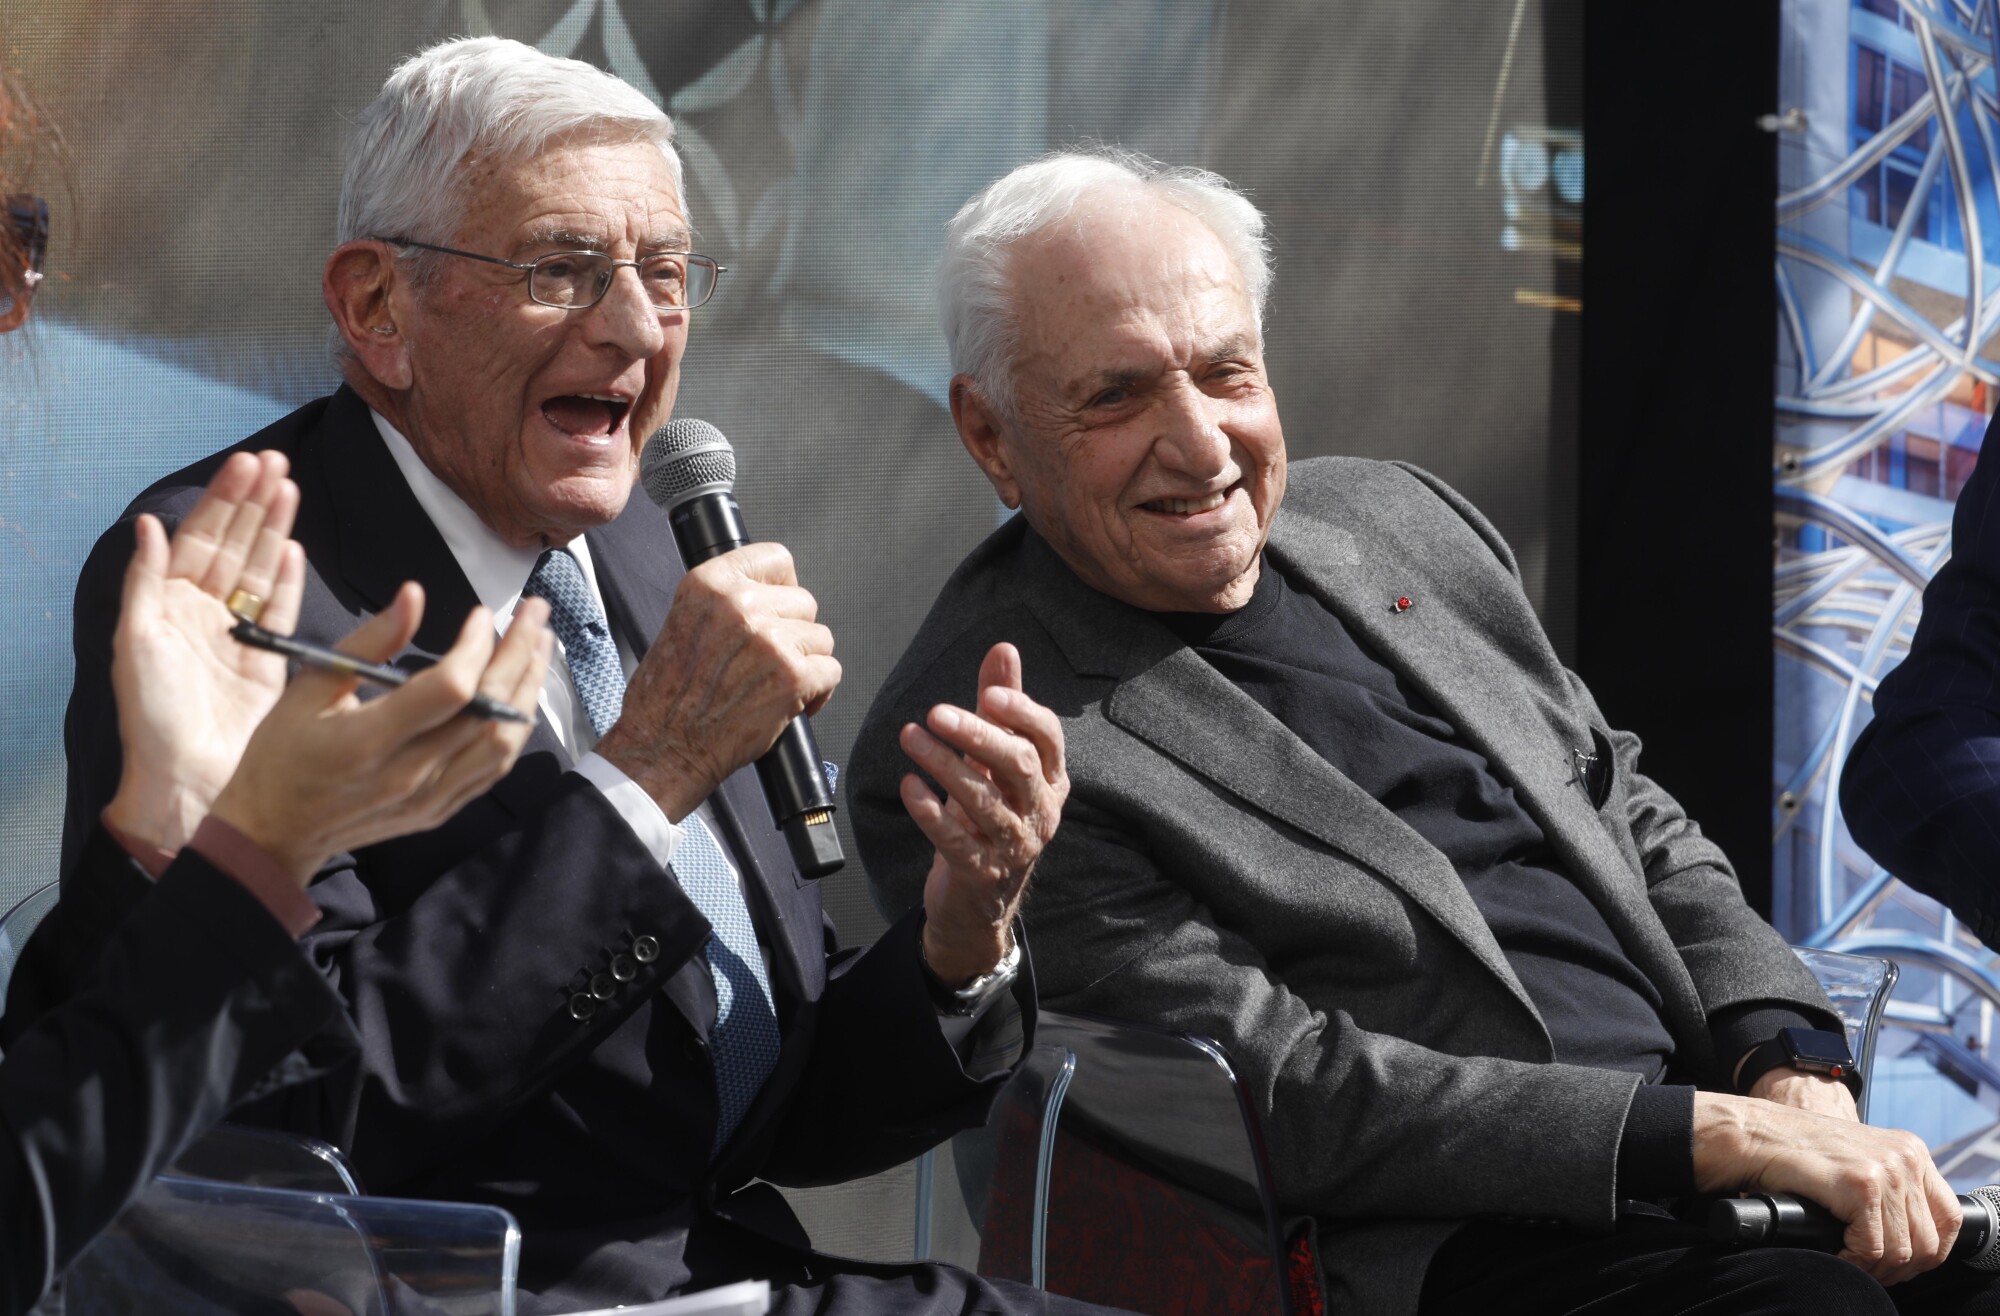 Sitting on a stage with Frank Gehry, Eli Broad speaks into a microphone.